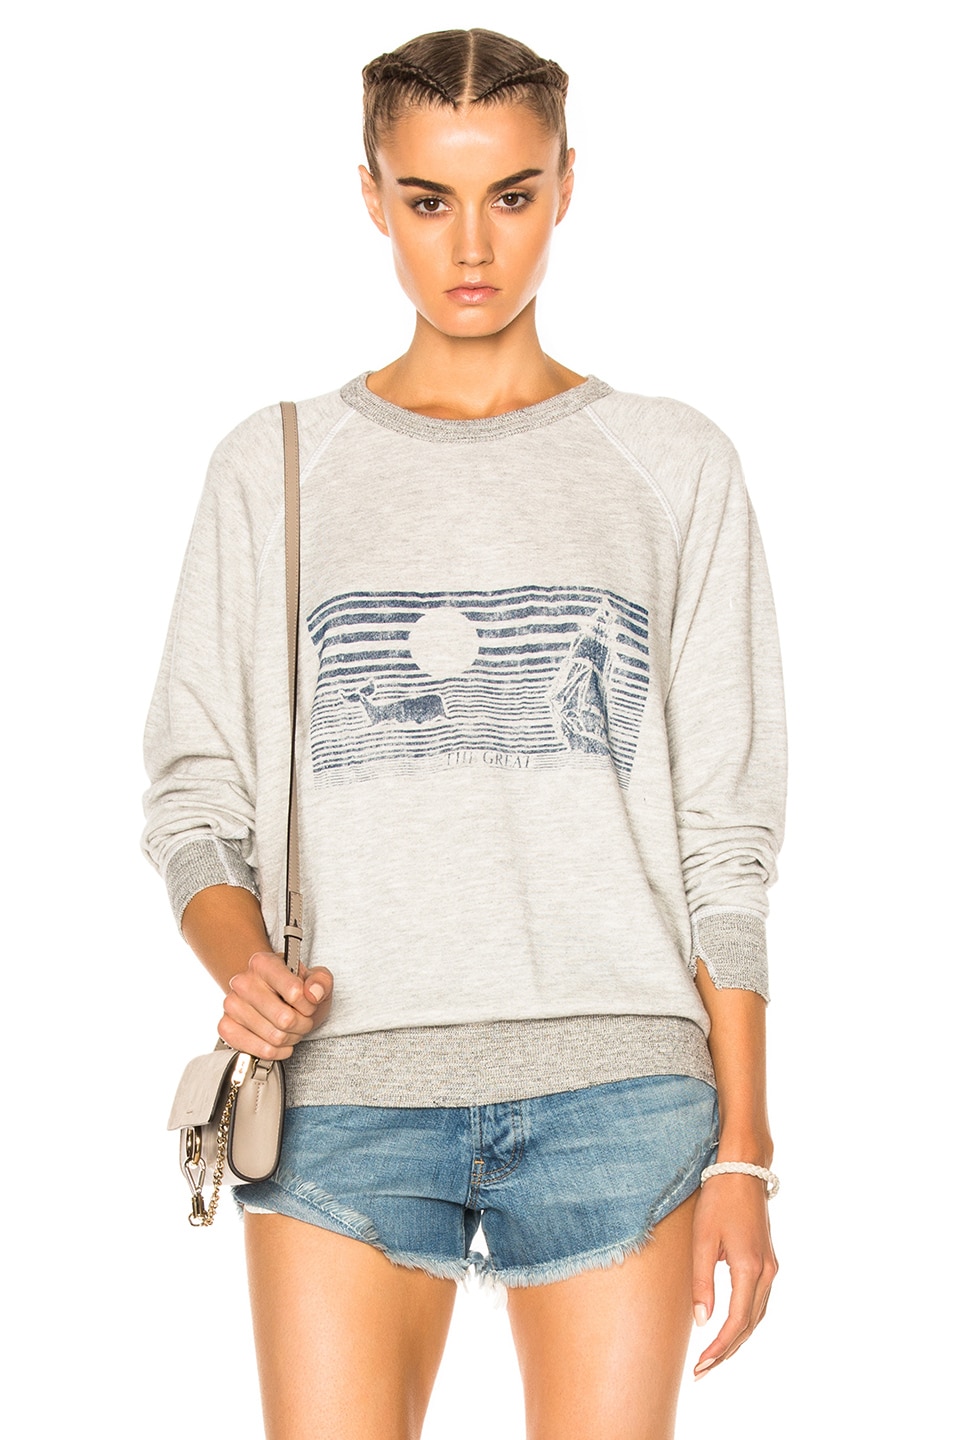 Image 1 of The Great Whale Graphic College Sweatshirt in Heather Grey & Navy